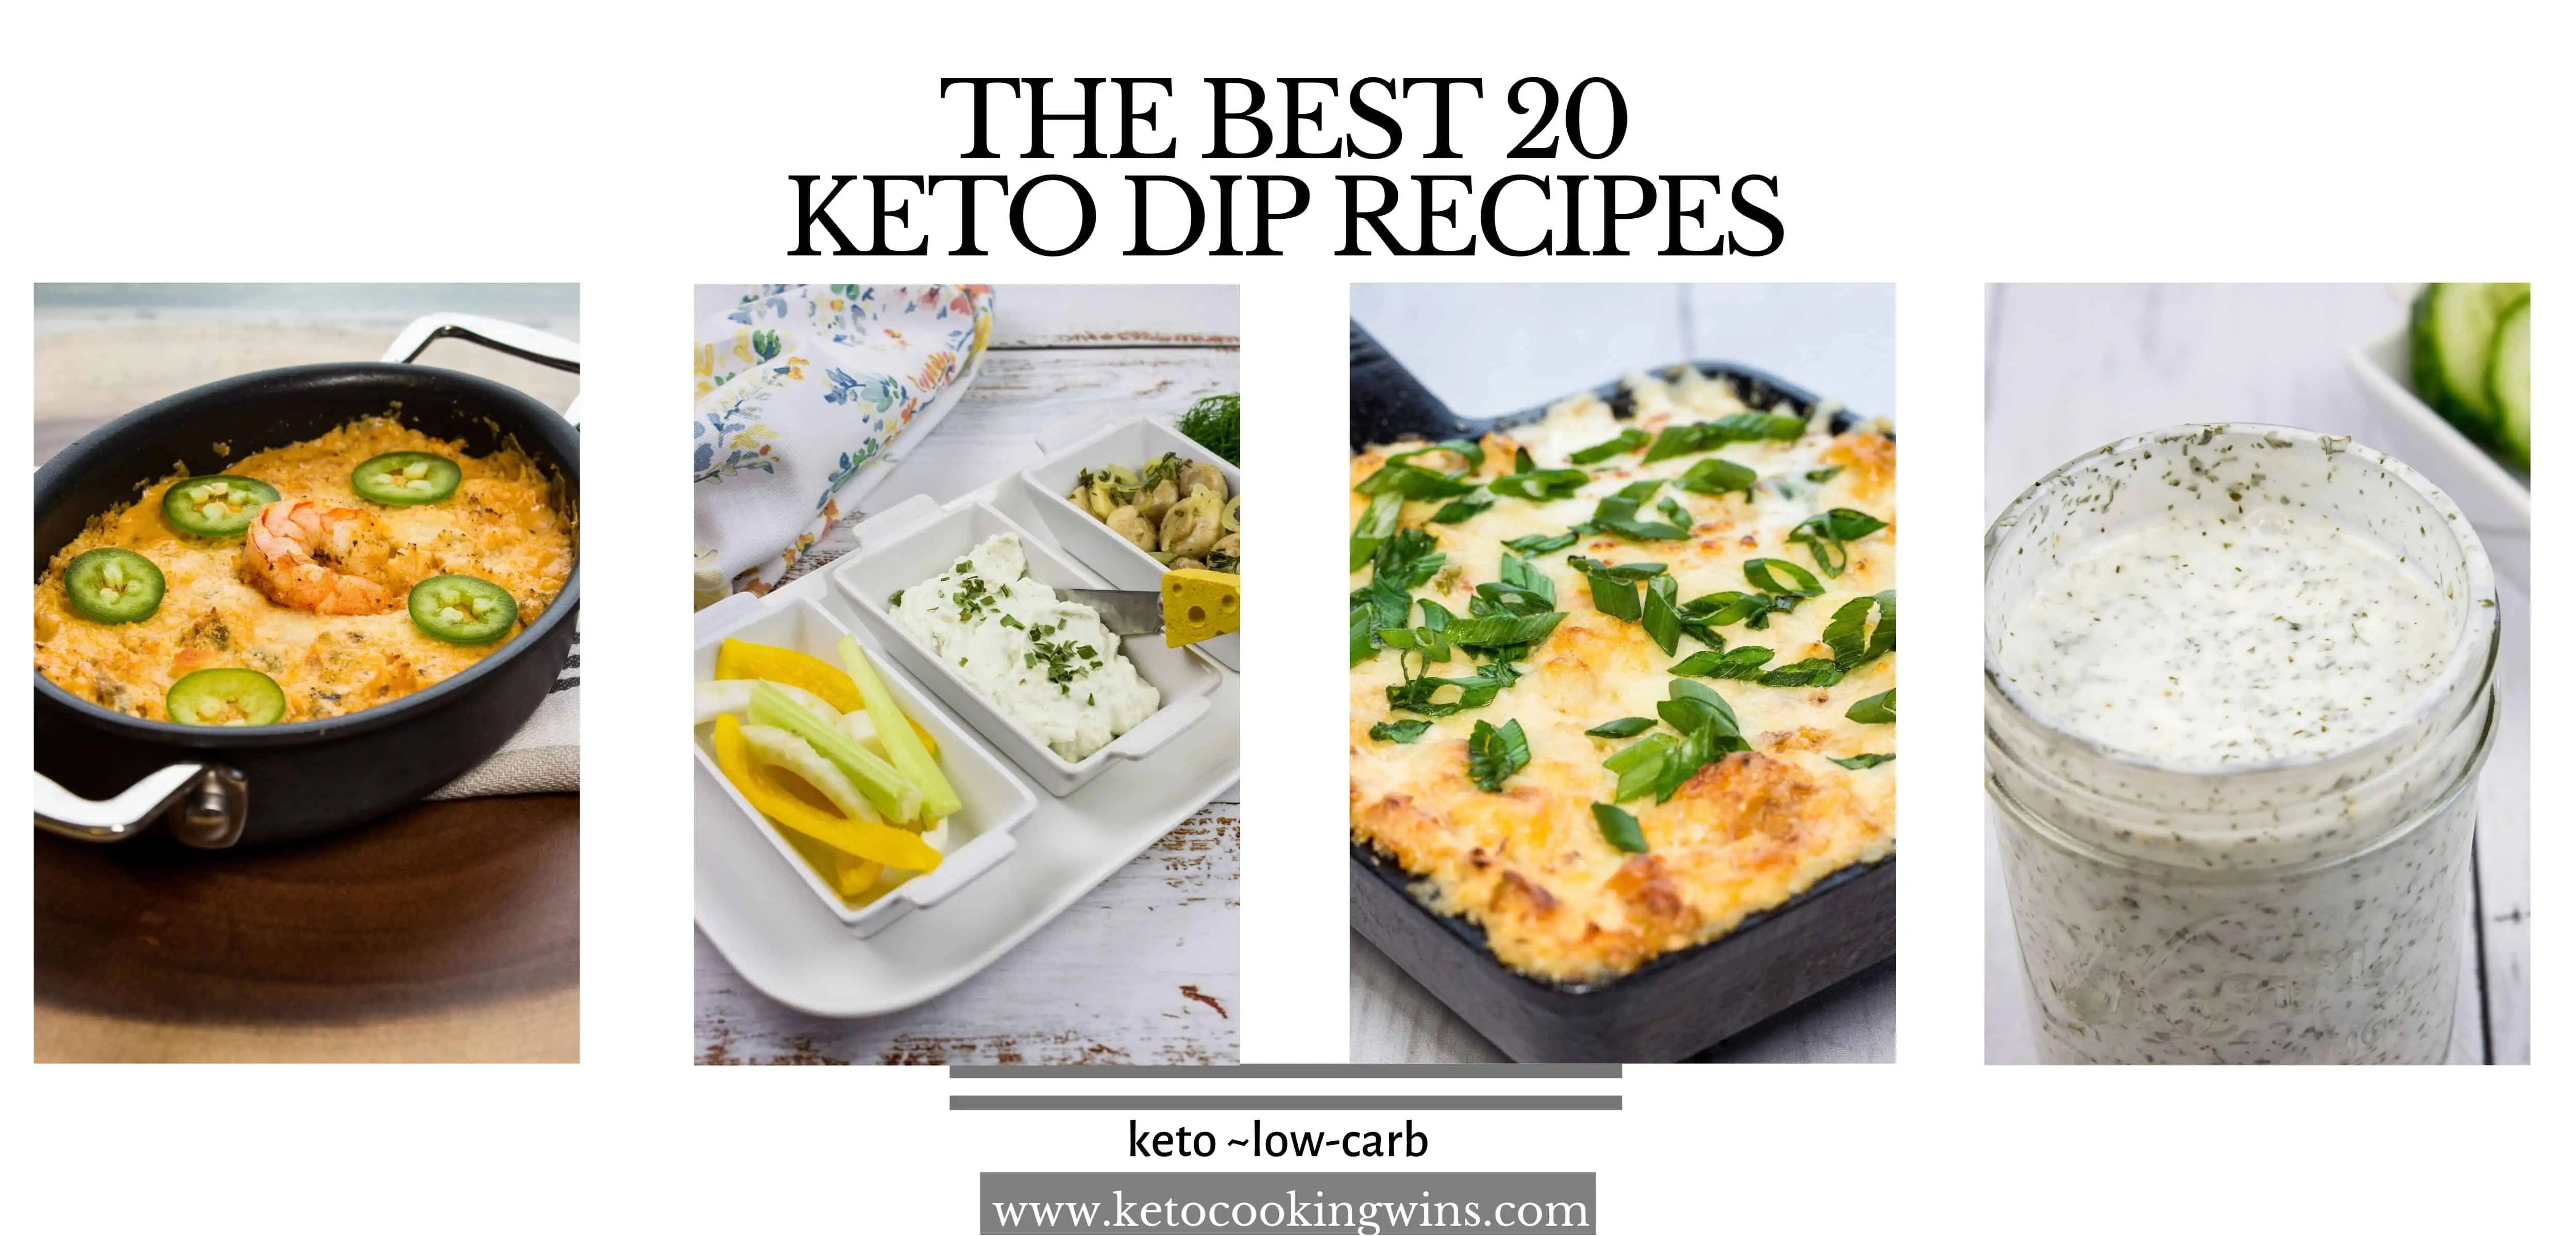 the best 20 keto dip recipes with pictures of shrimp dip, crab dip, ranch dip and blue cheese dip